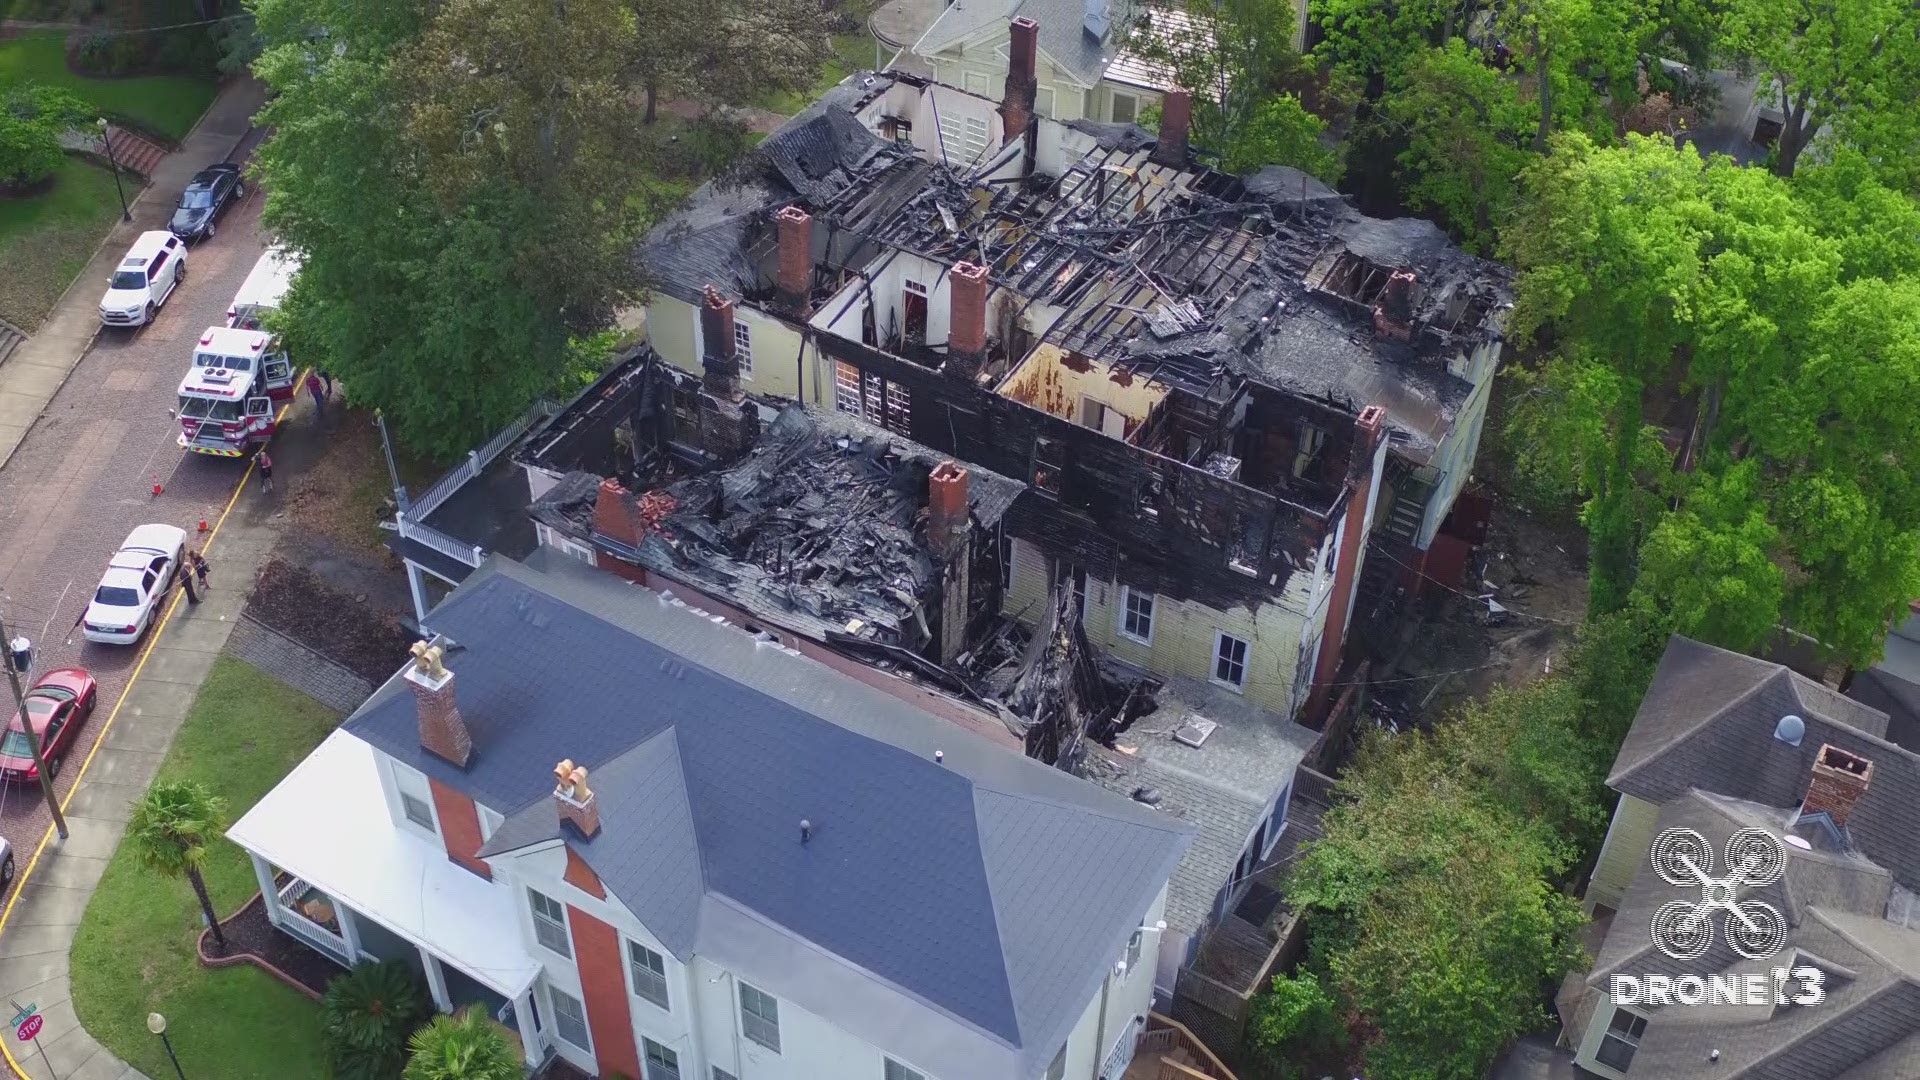 The view of #Drone13 offers a unique view of the challenges faced by firefighters as they dealt with huge homes built just a few feet apart, and the damage left behind.